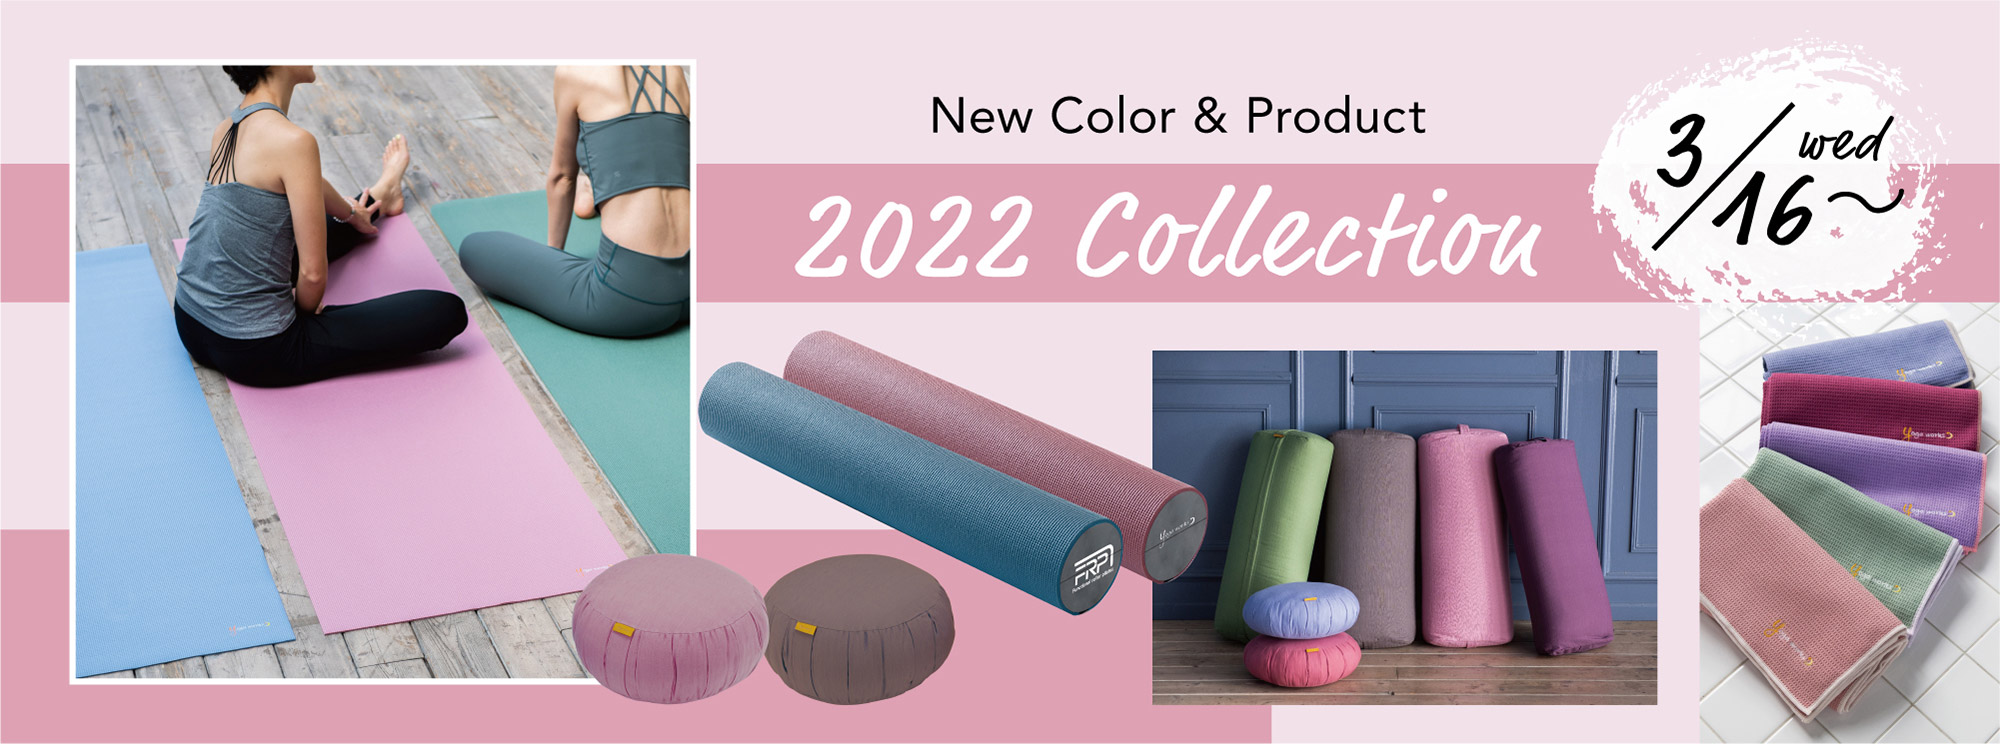 New Products 2022